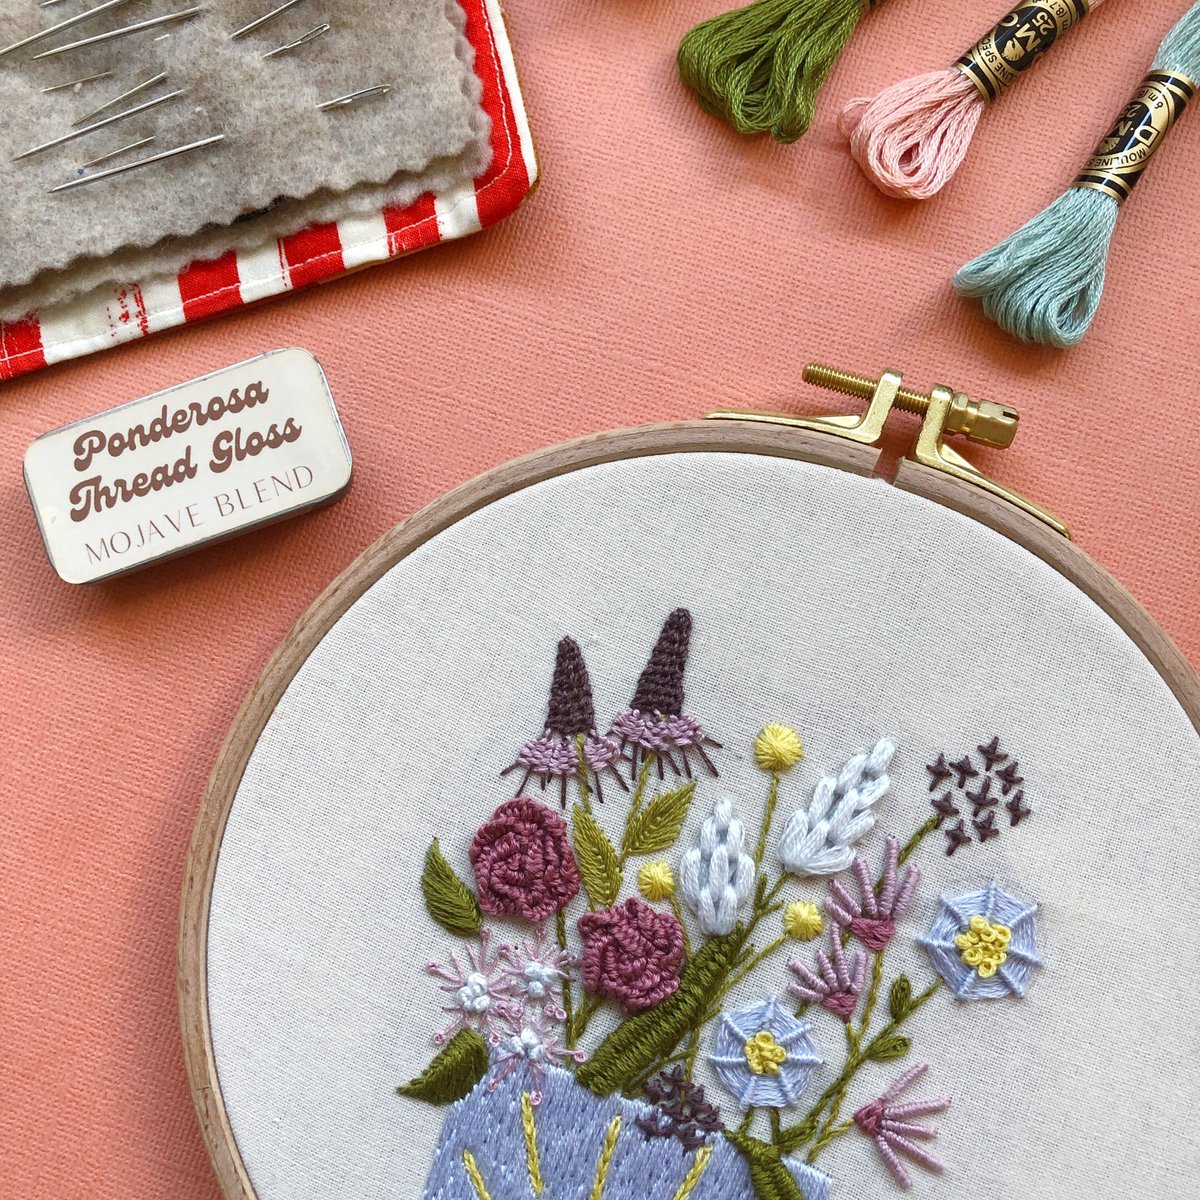 Before I left on my trip, I sent the packaging for this embroidery kit off the the printer! 

Who's excited to get to stitch this design?

#3Dembroidery #floralembroidery #stitching #flowerlover #loveembroidery #lovecrafts #moderndecor #embroiderykit #mcreativej #dmcthreads